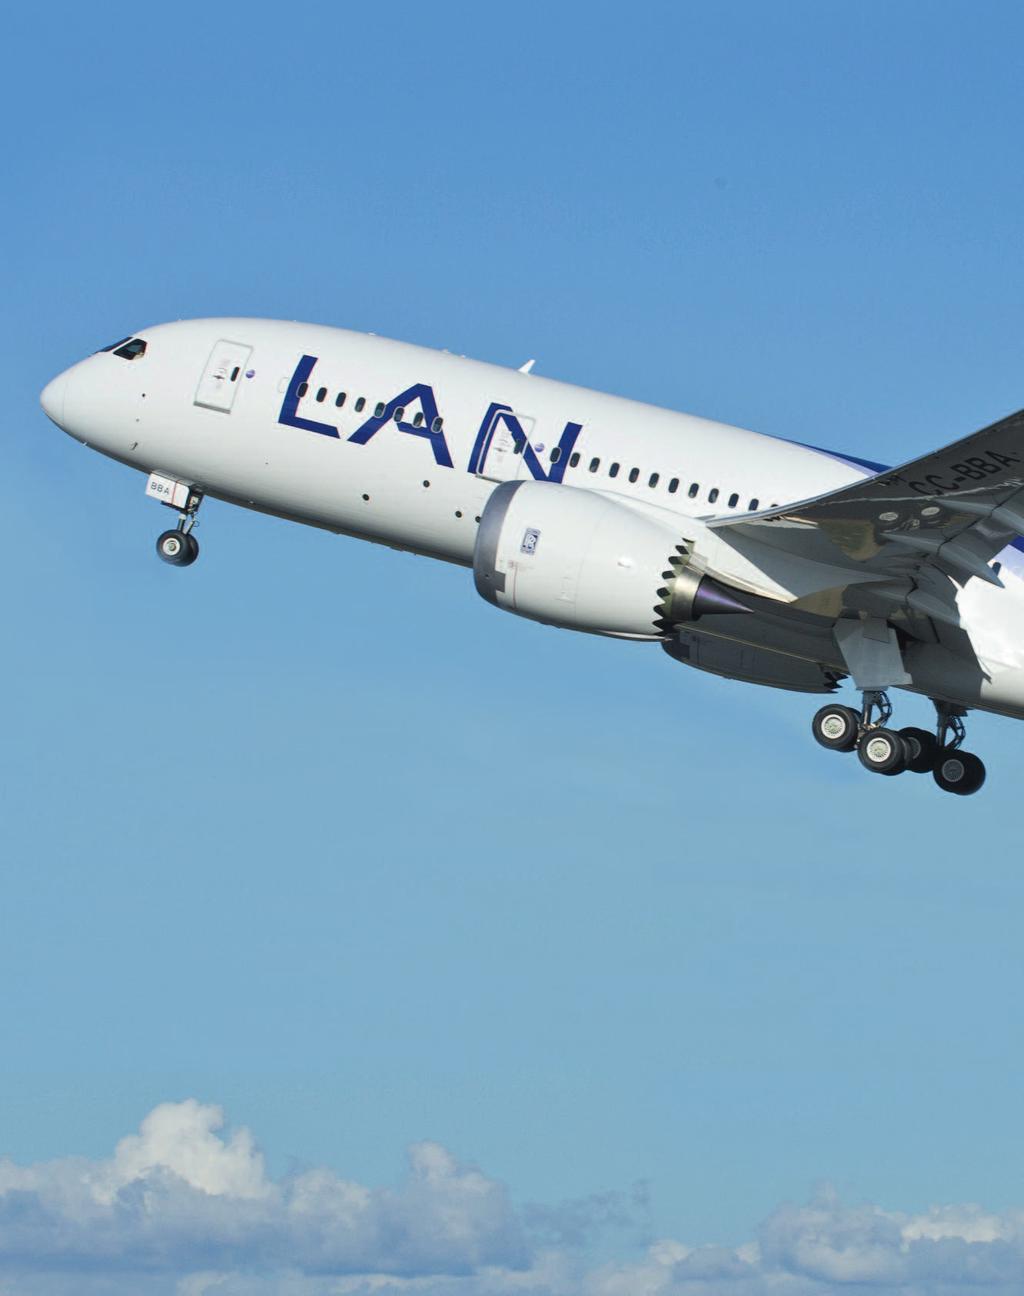 LATAM is the first airline group in the